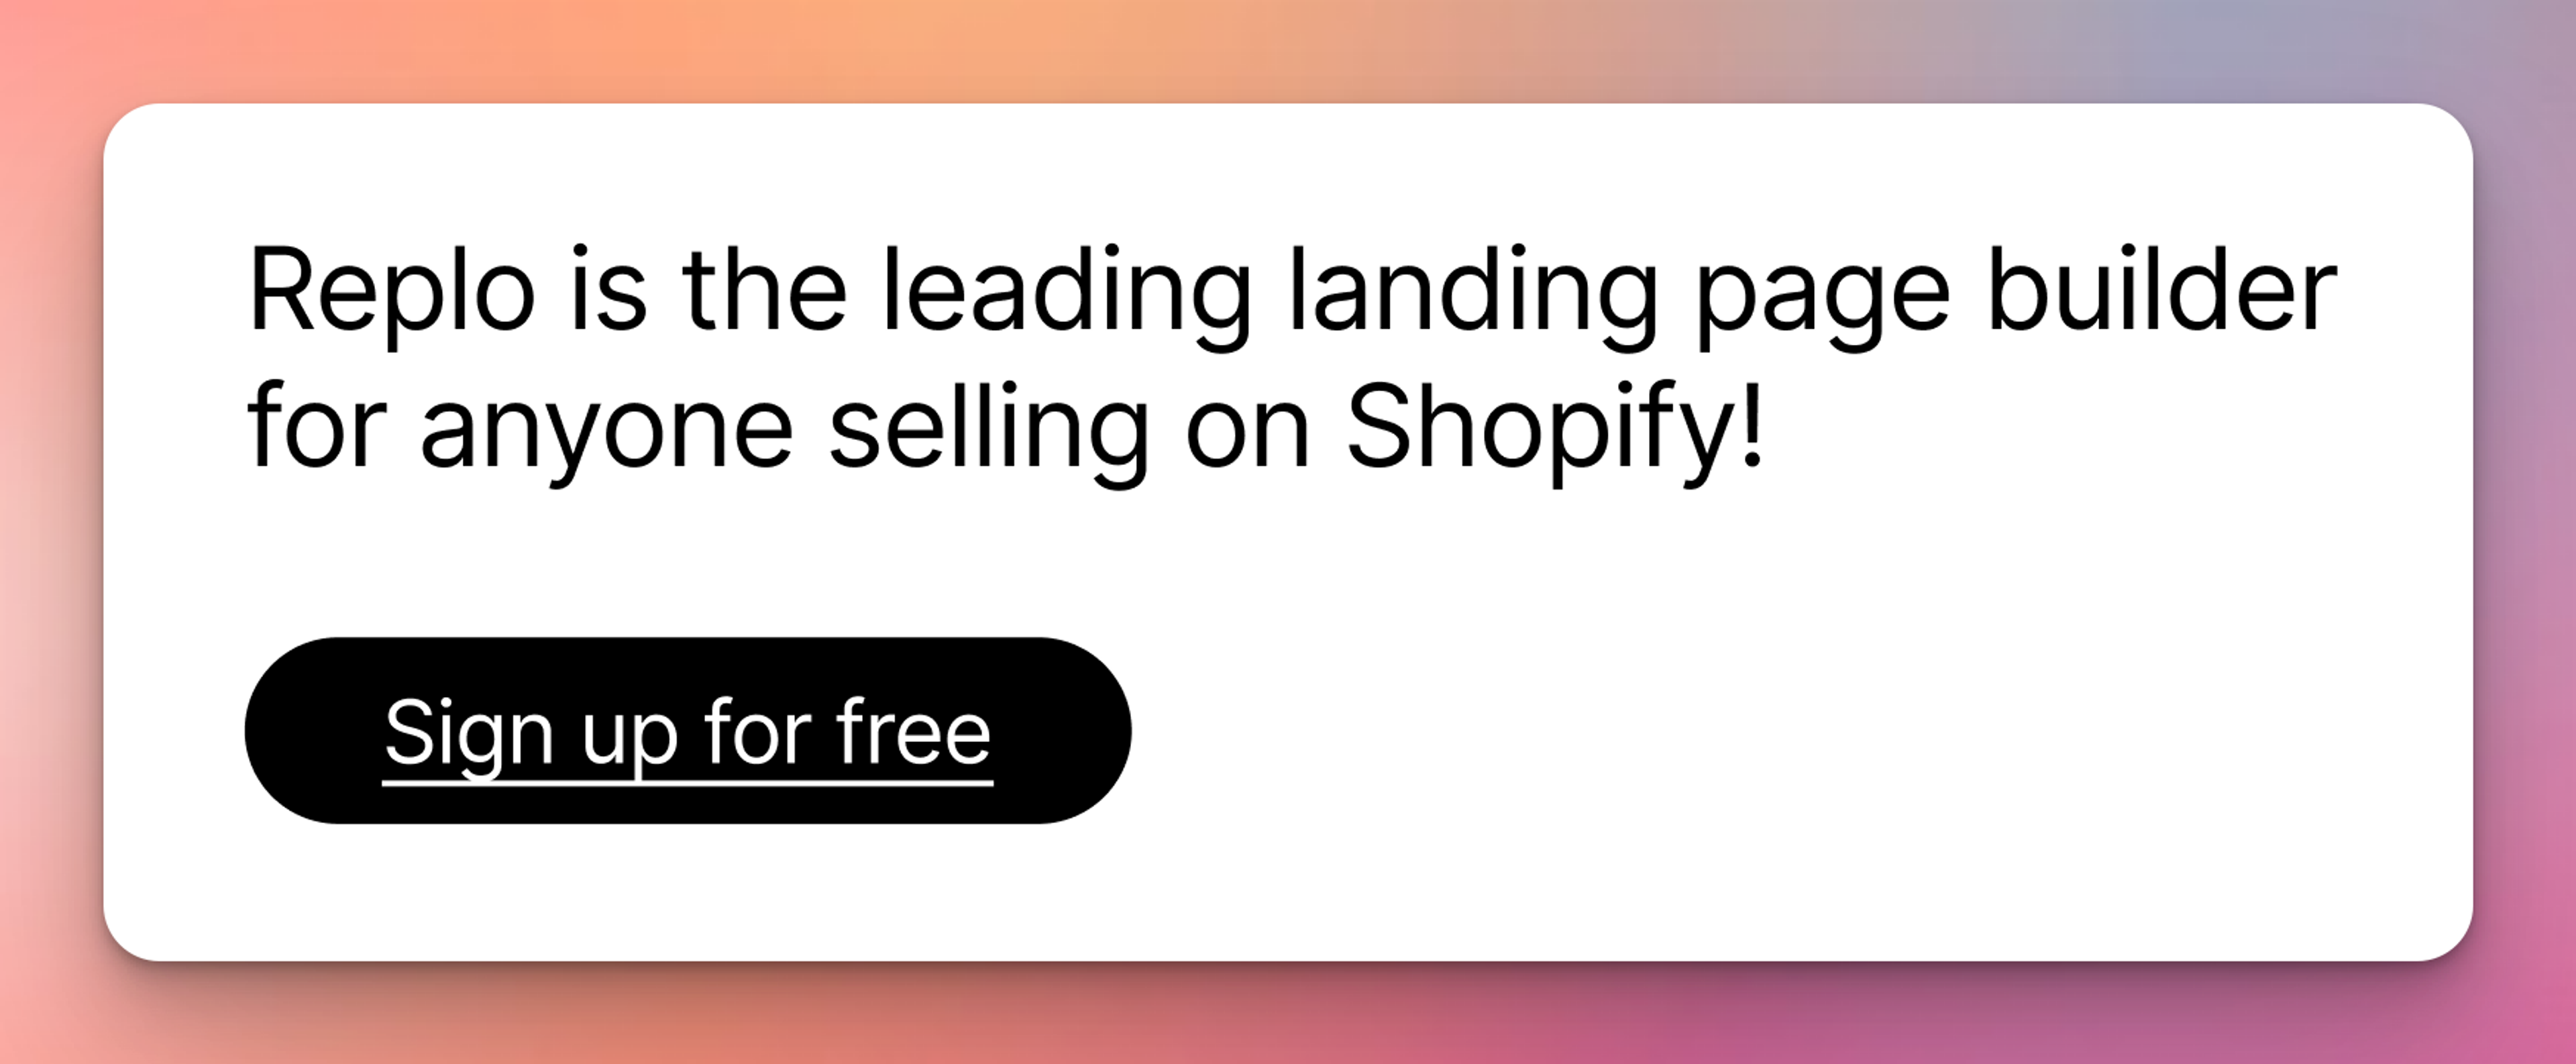 Leading Landing Page Builder Notice